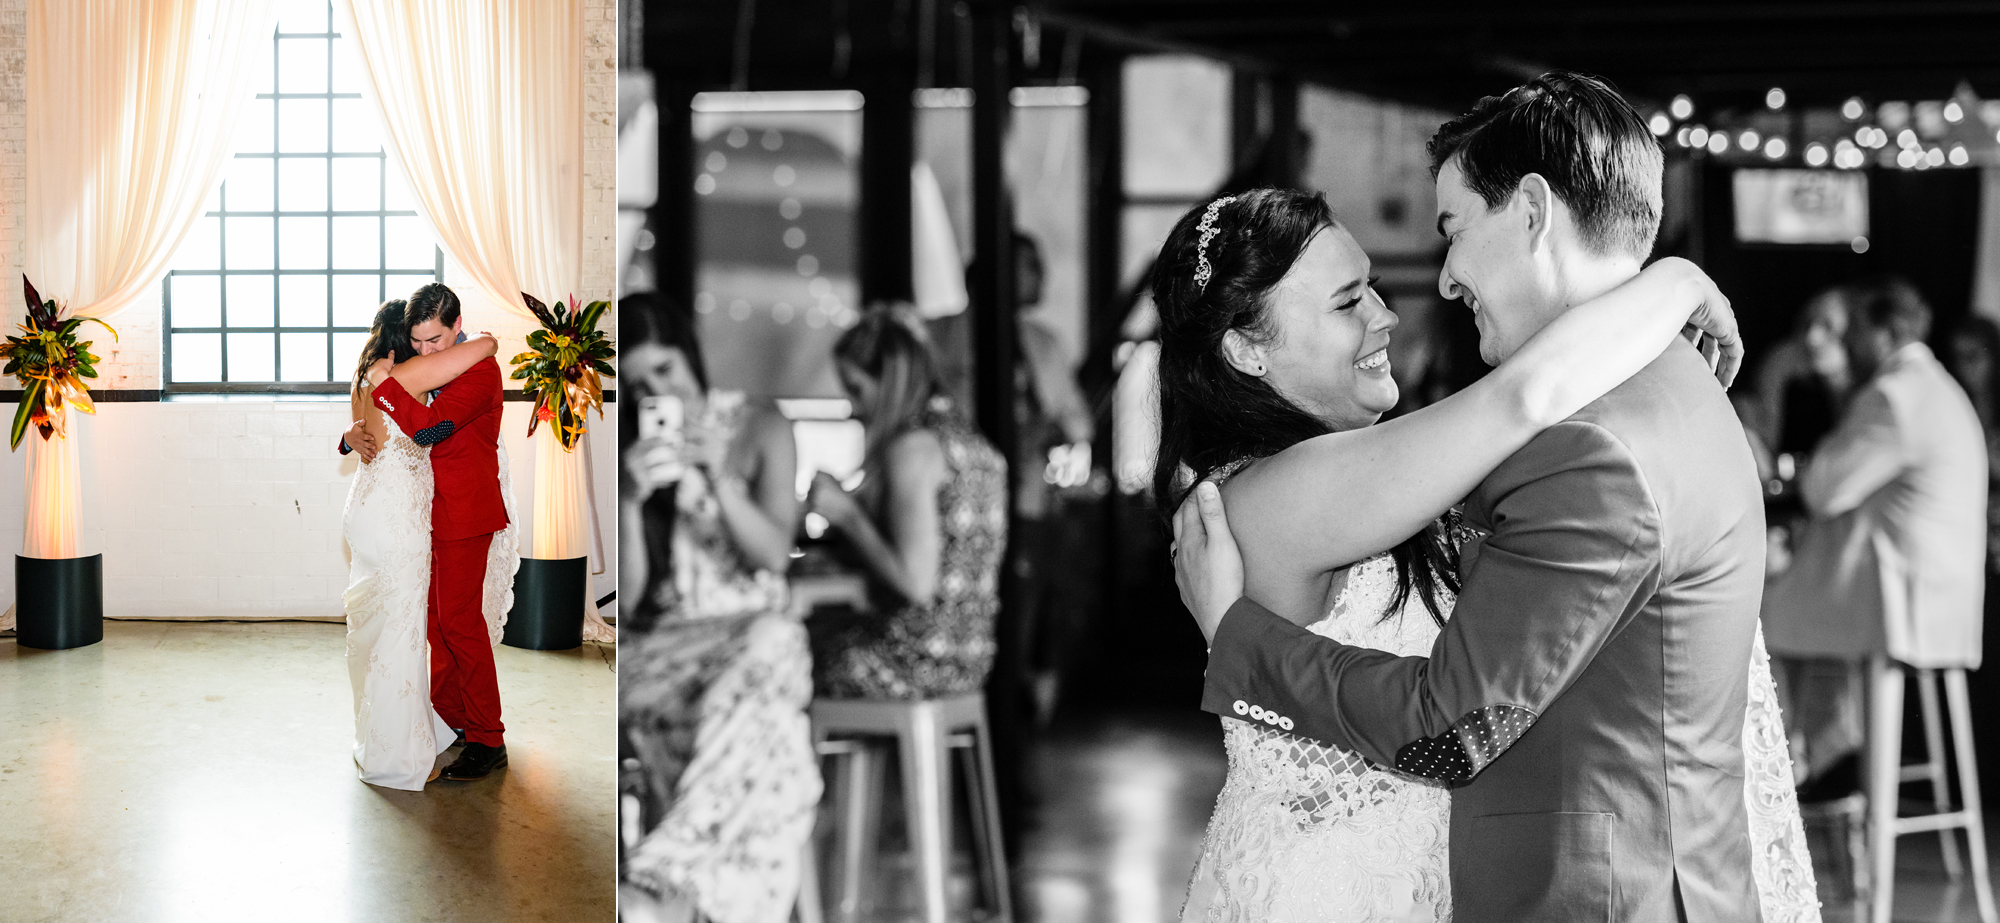 Havana Nights themed wedding reception at The Brick by MichaelAngelos Events : First Dance